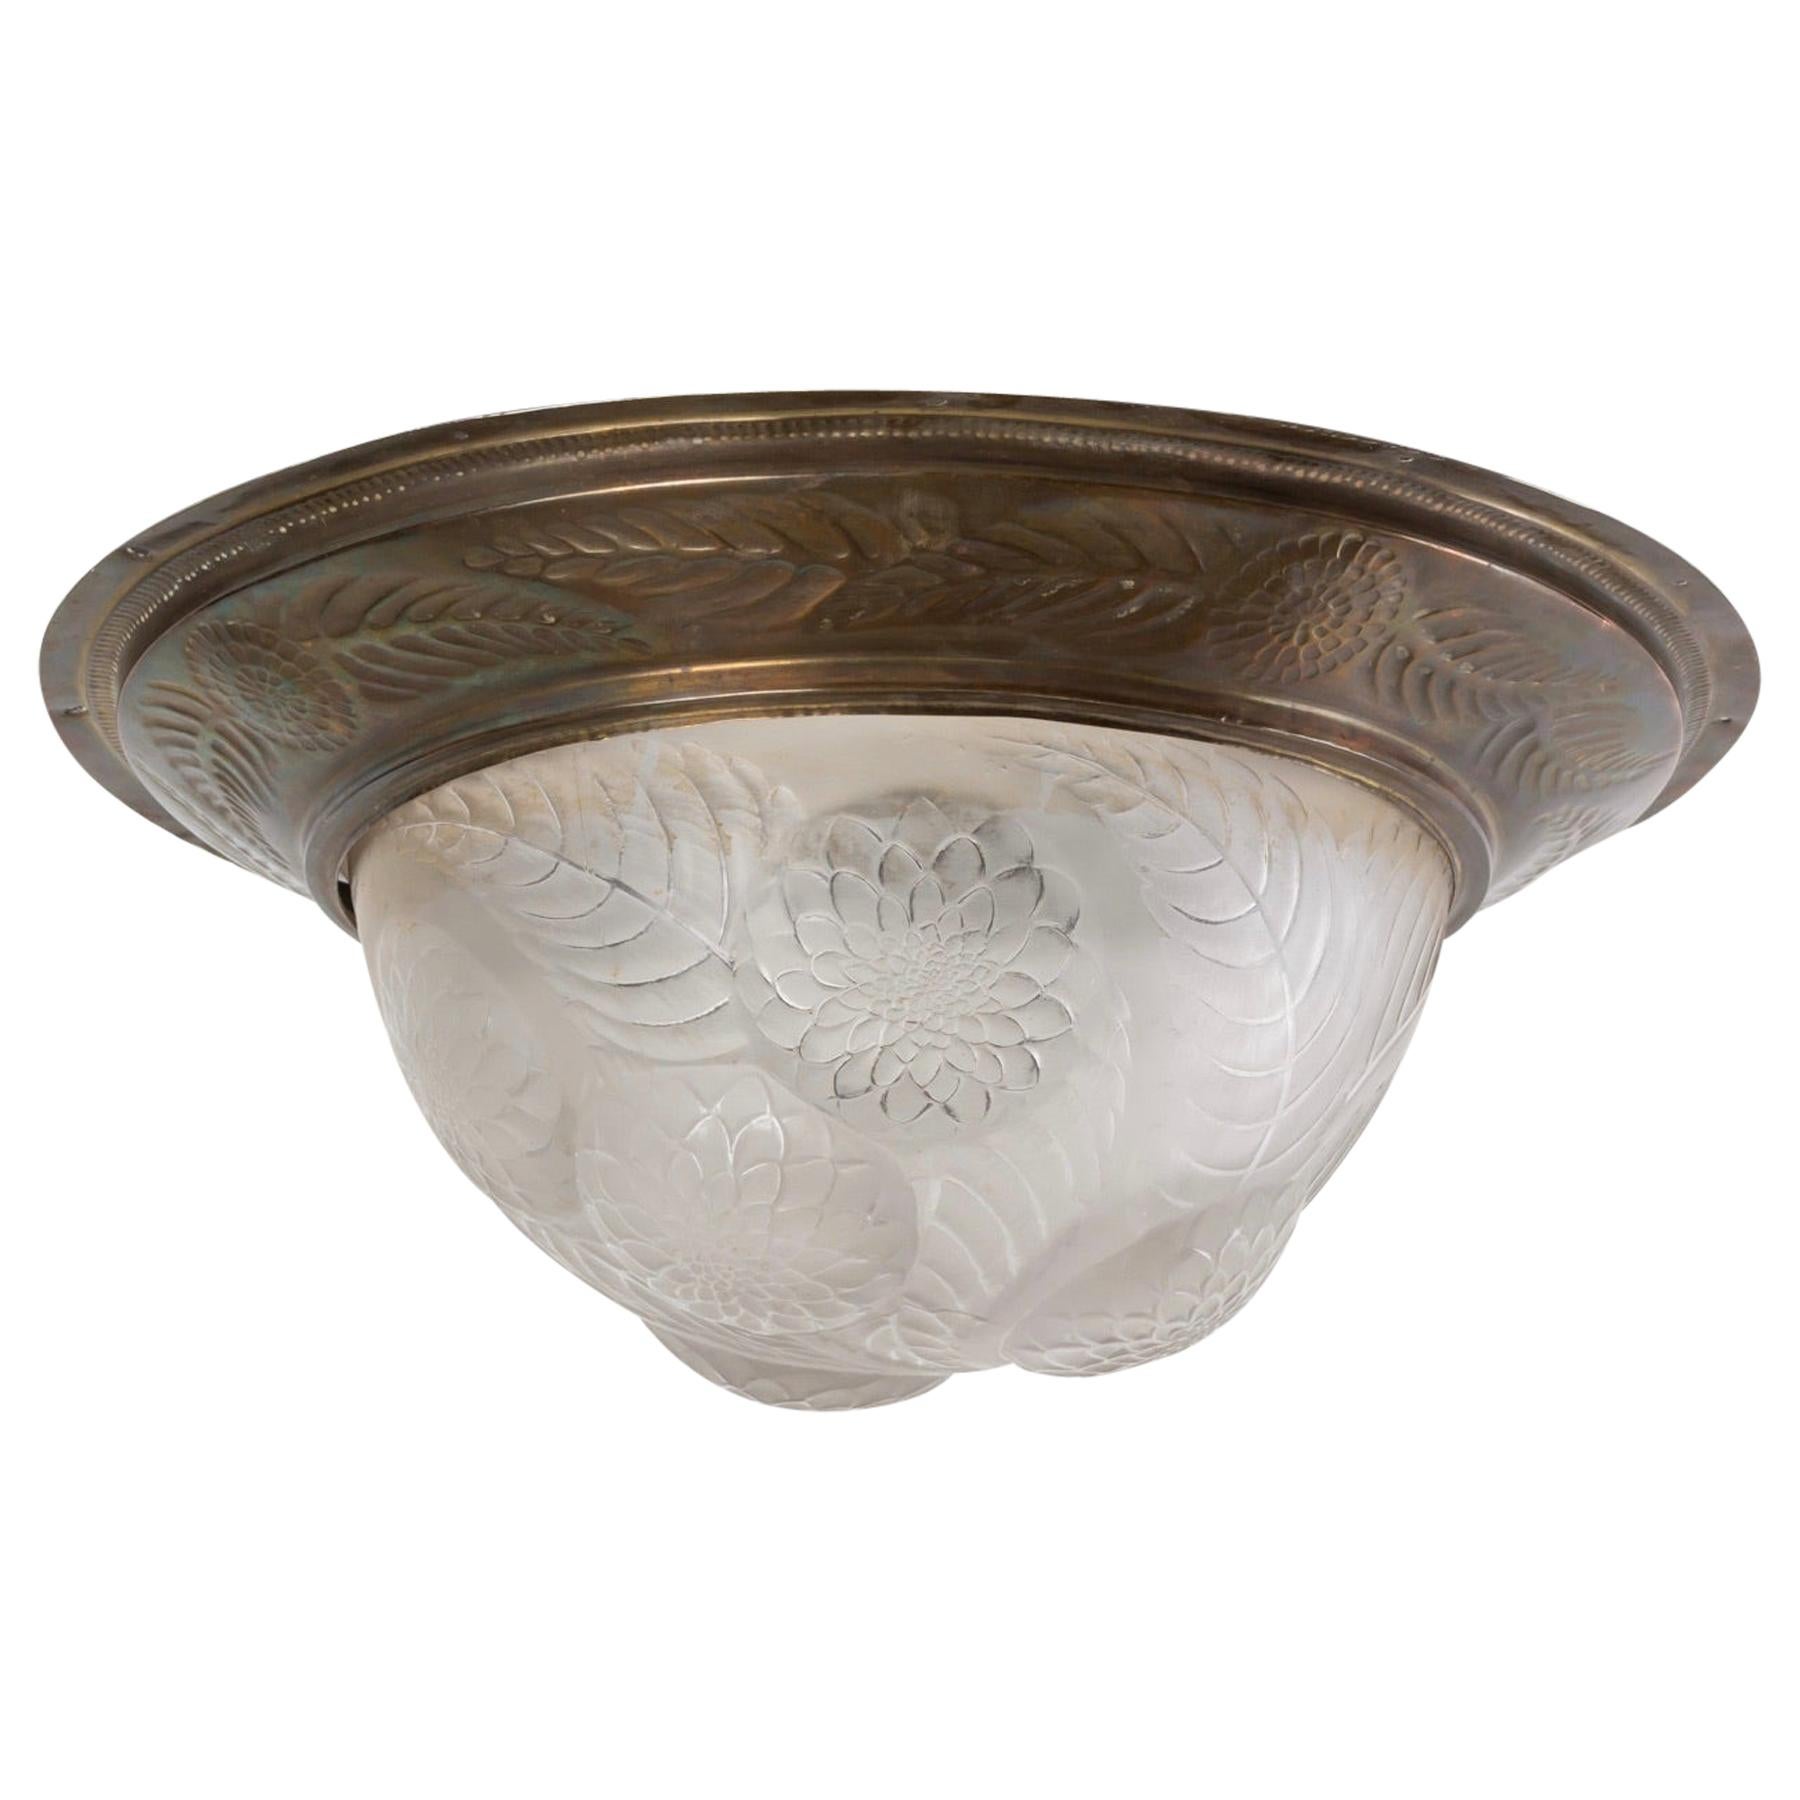 1921 Rene Lalique Dahlias Ceiling Light Fixture Shade Frosted Glass 